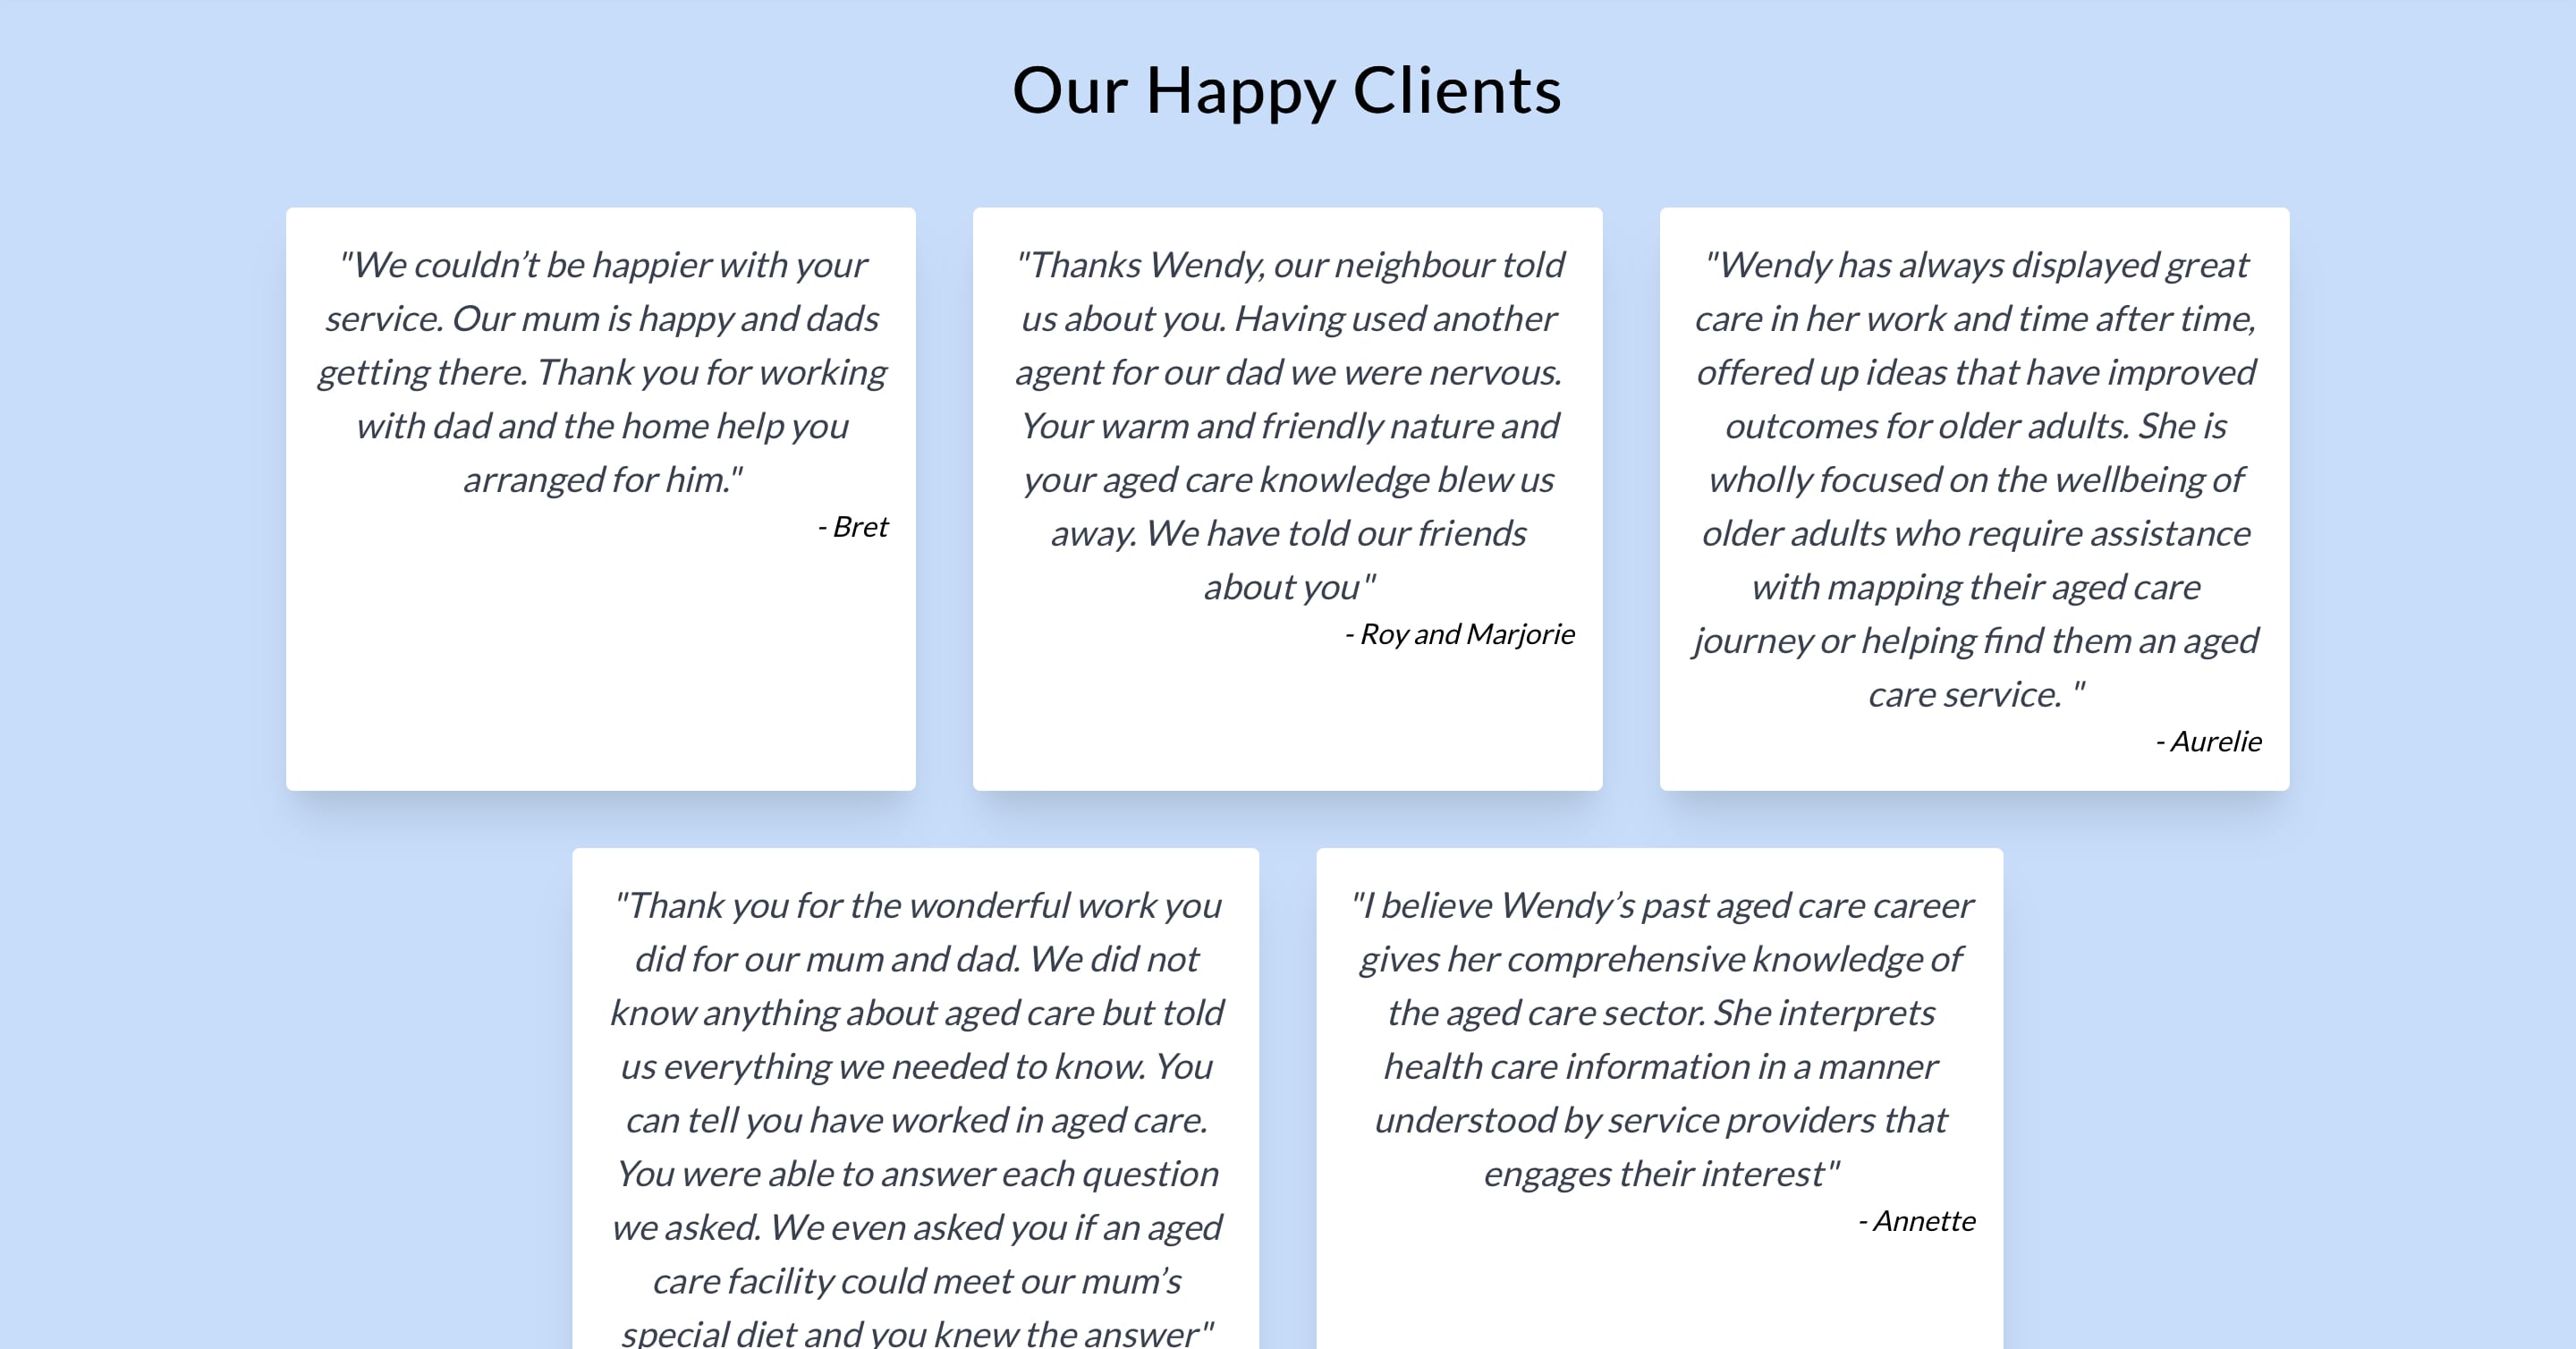 The testimonials section